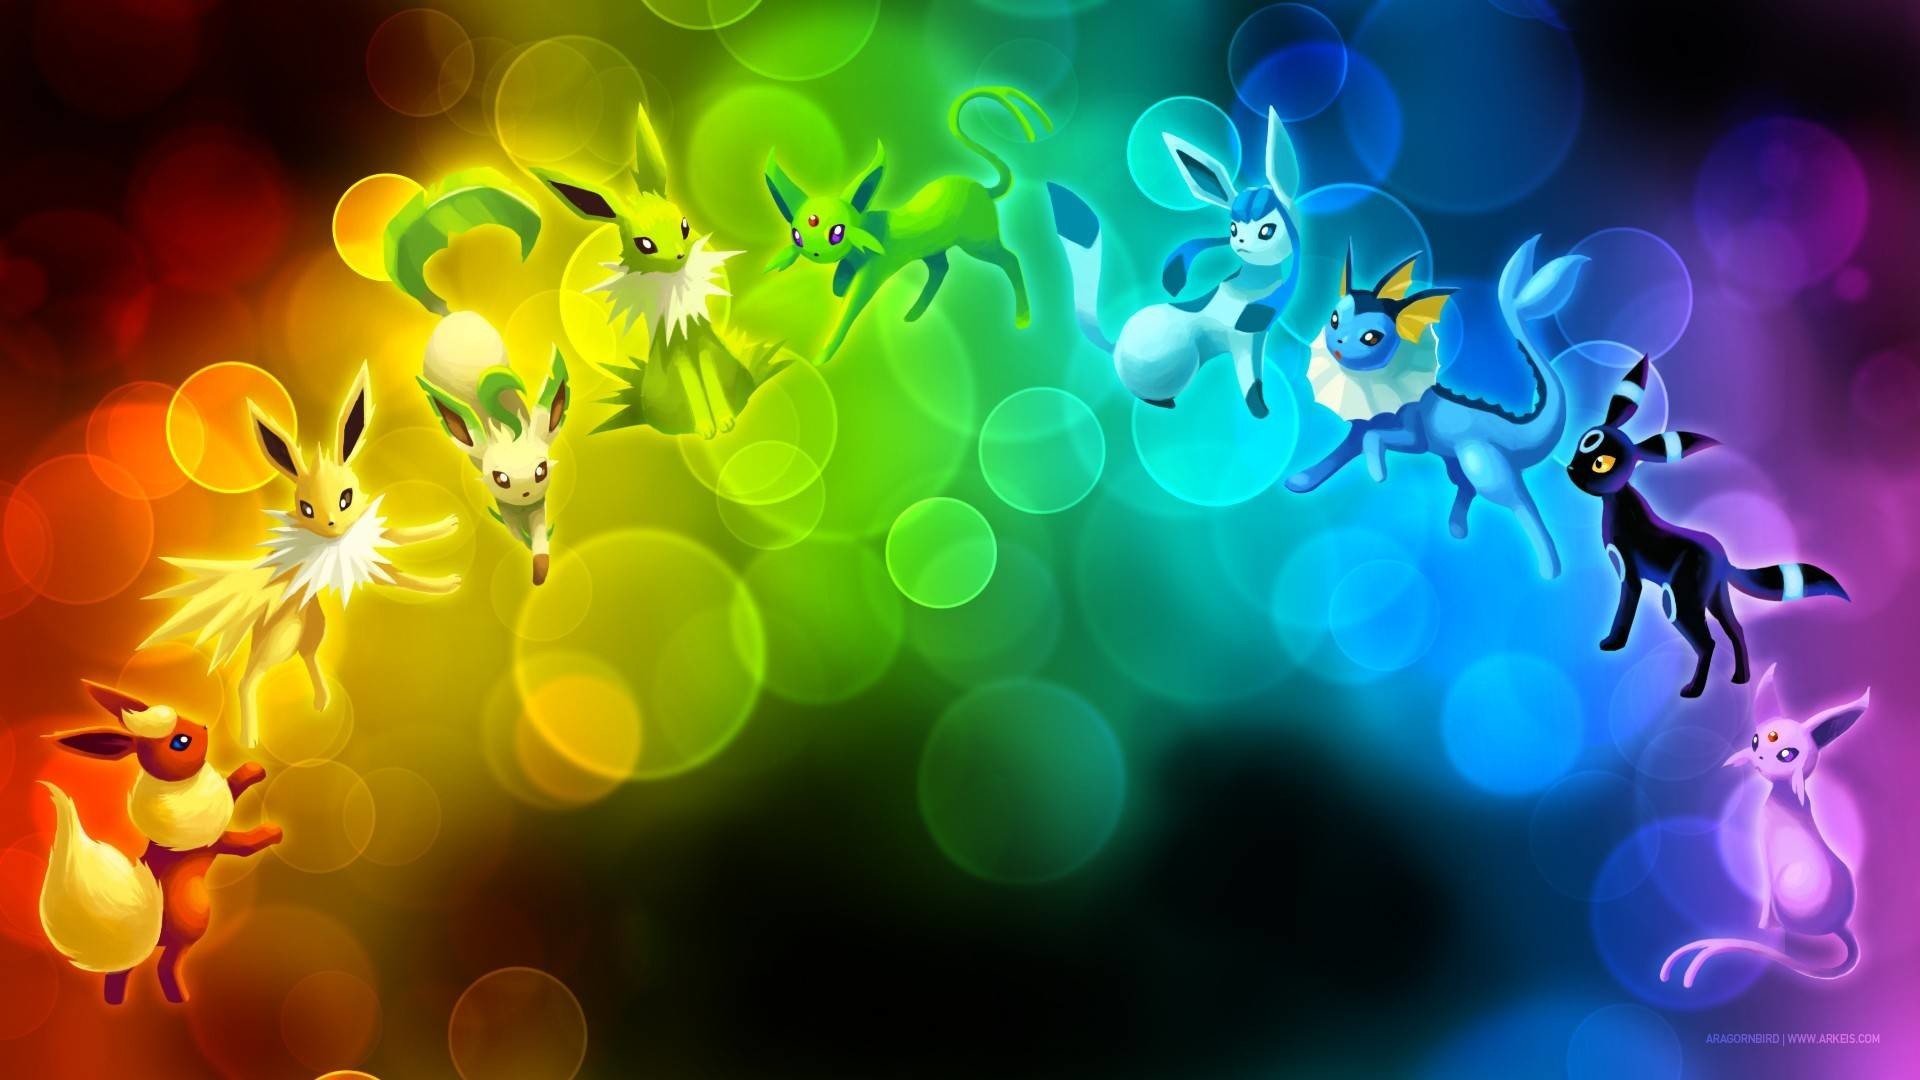 1920x1080  Pokemon wallpaper here in high quality | HD Wallpapers |  Pinterest | Wallpaper and Hd